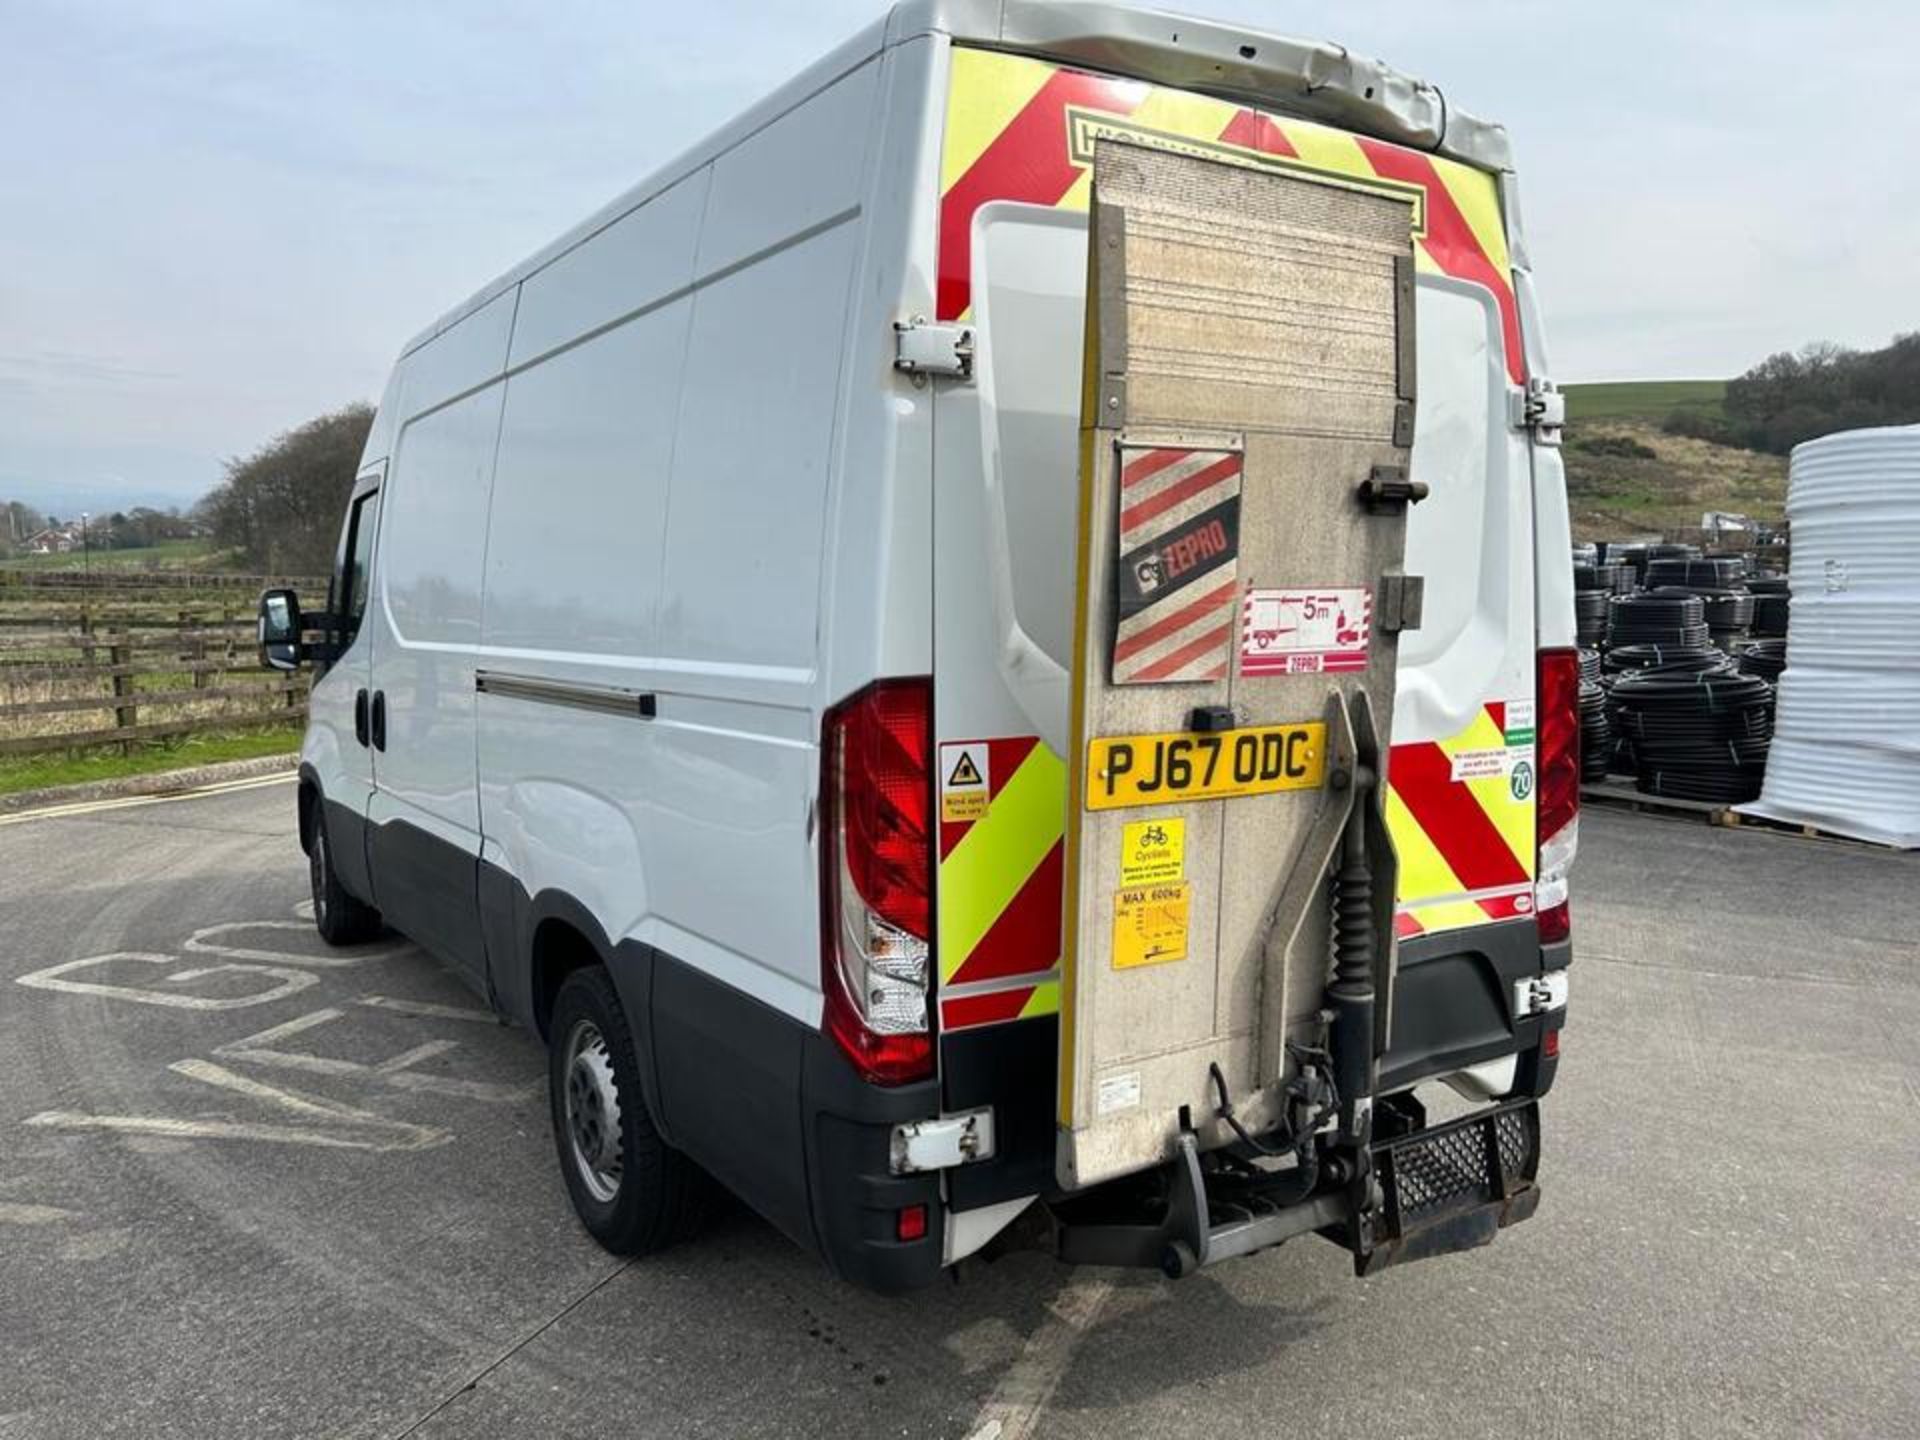 2017 IVECO DAILY -123K MILES - HPI CLEAR- READY TO WORK! - Image 3 of 13